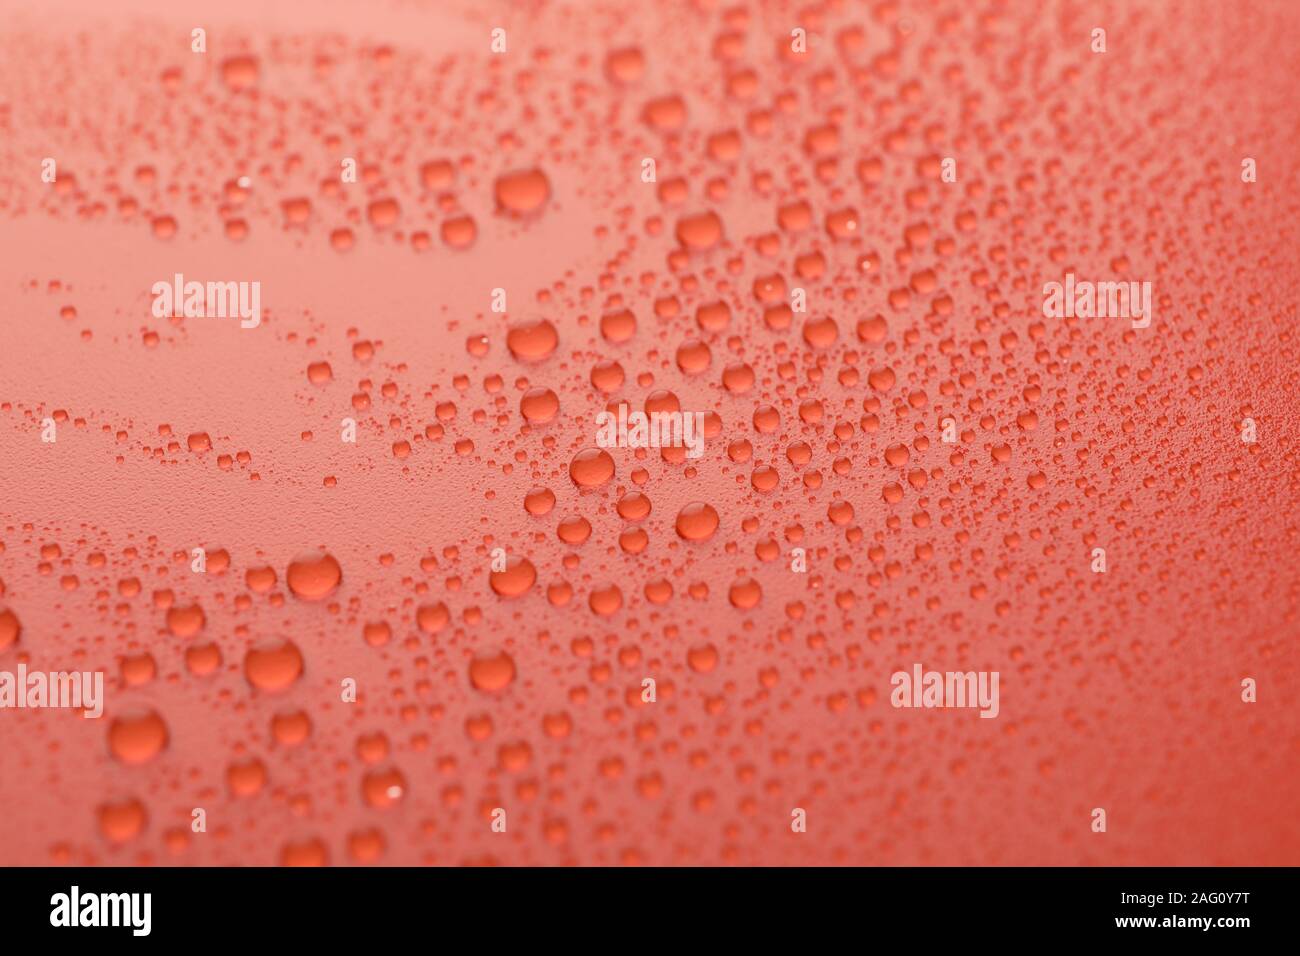 Many water drops on red background. Texture background. Stock Photo